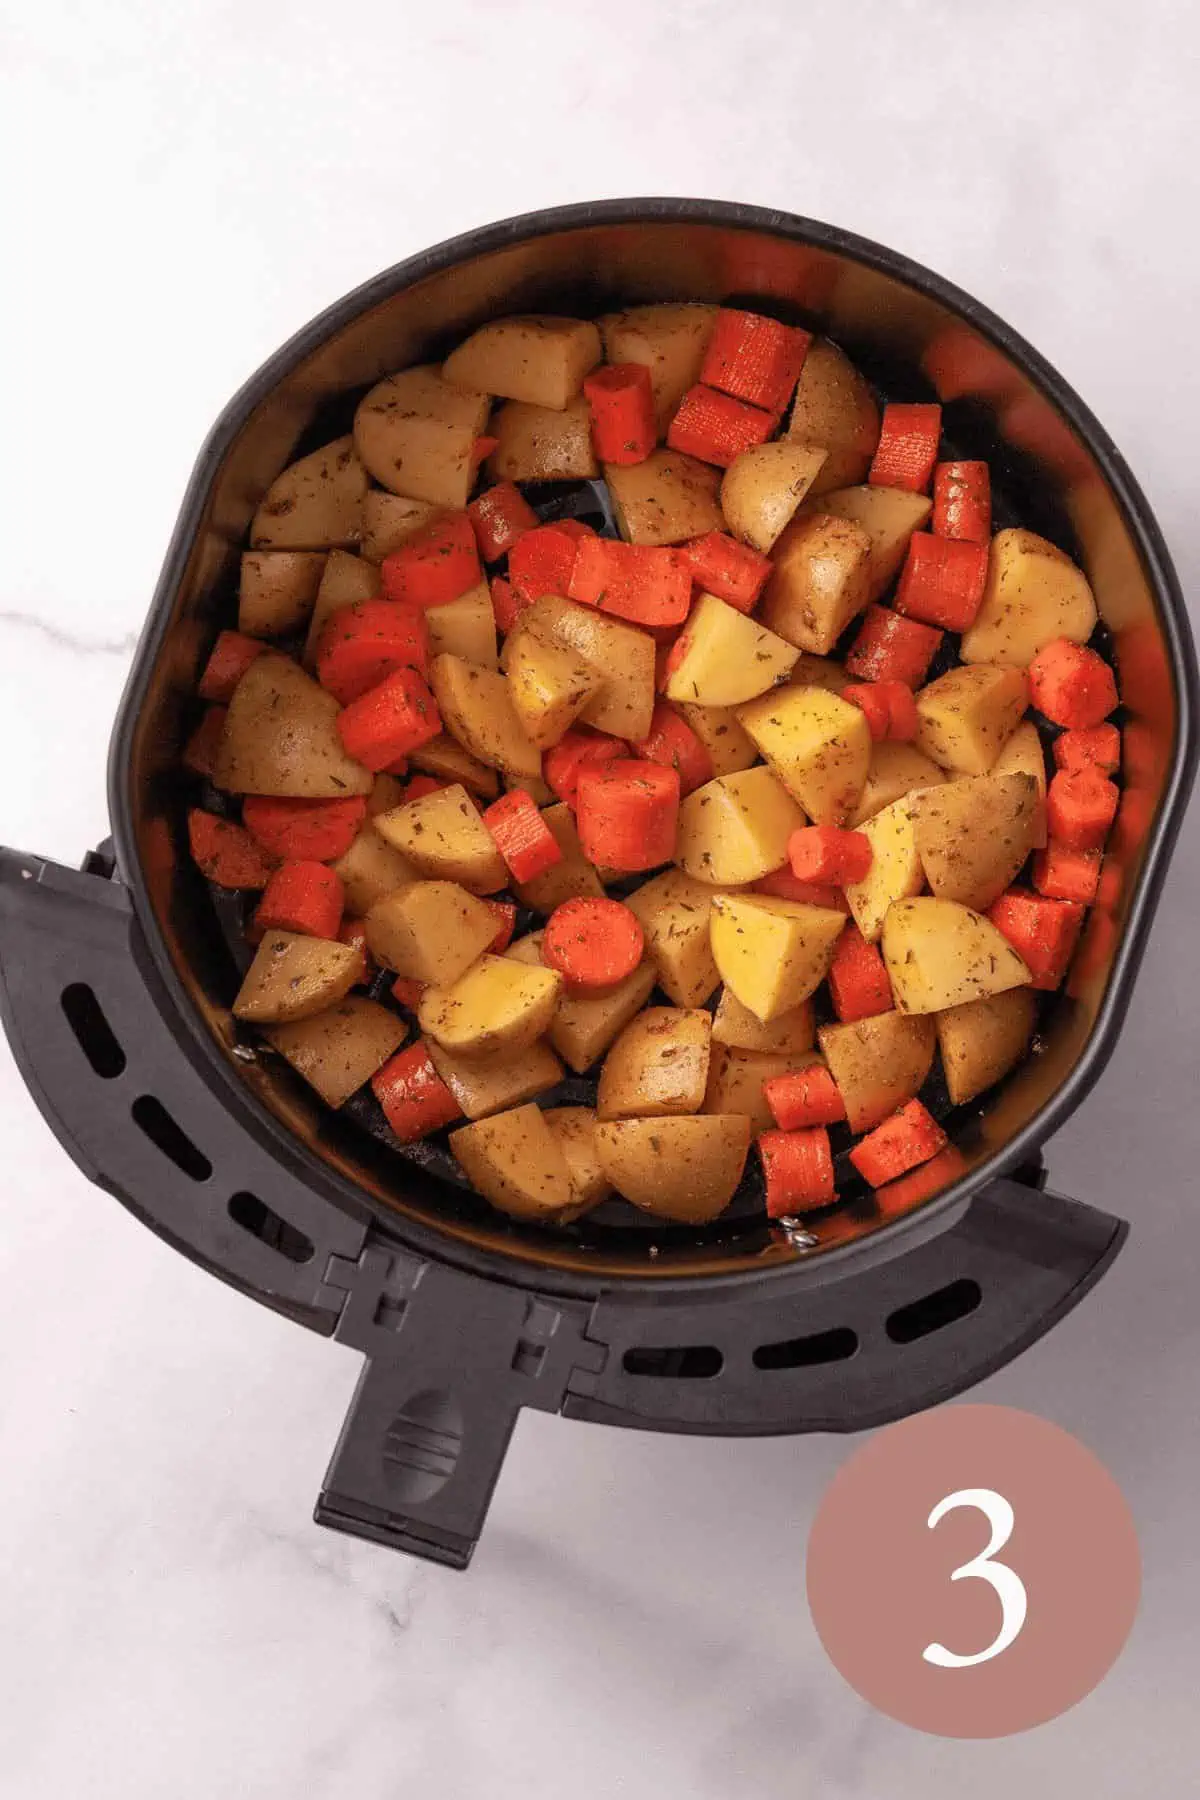 Overhead image of chopped potatoes and carrots in basket of air fryer before frying